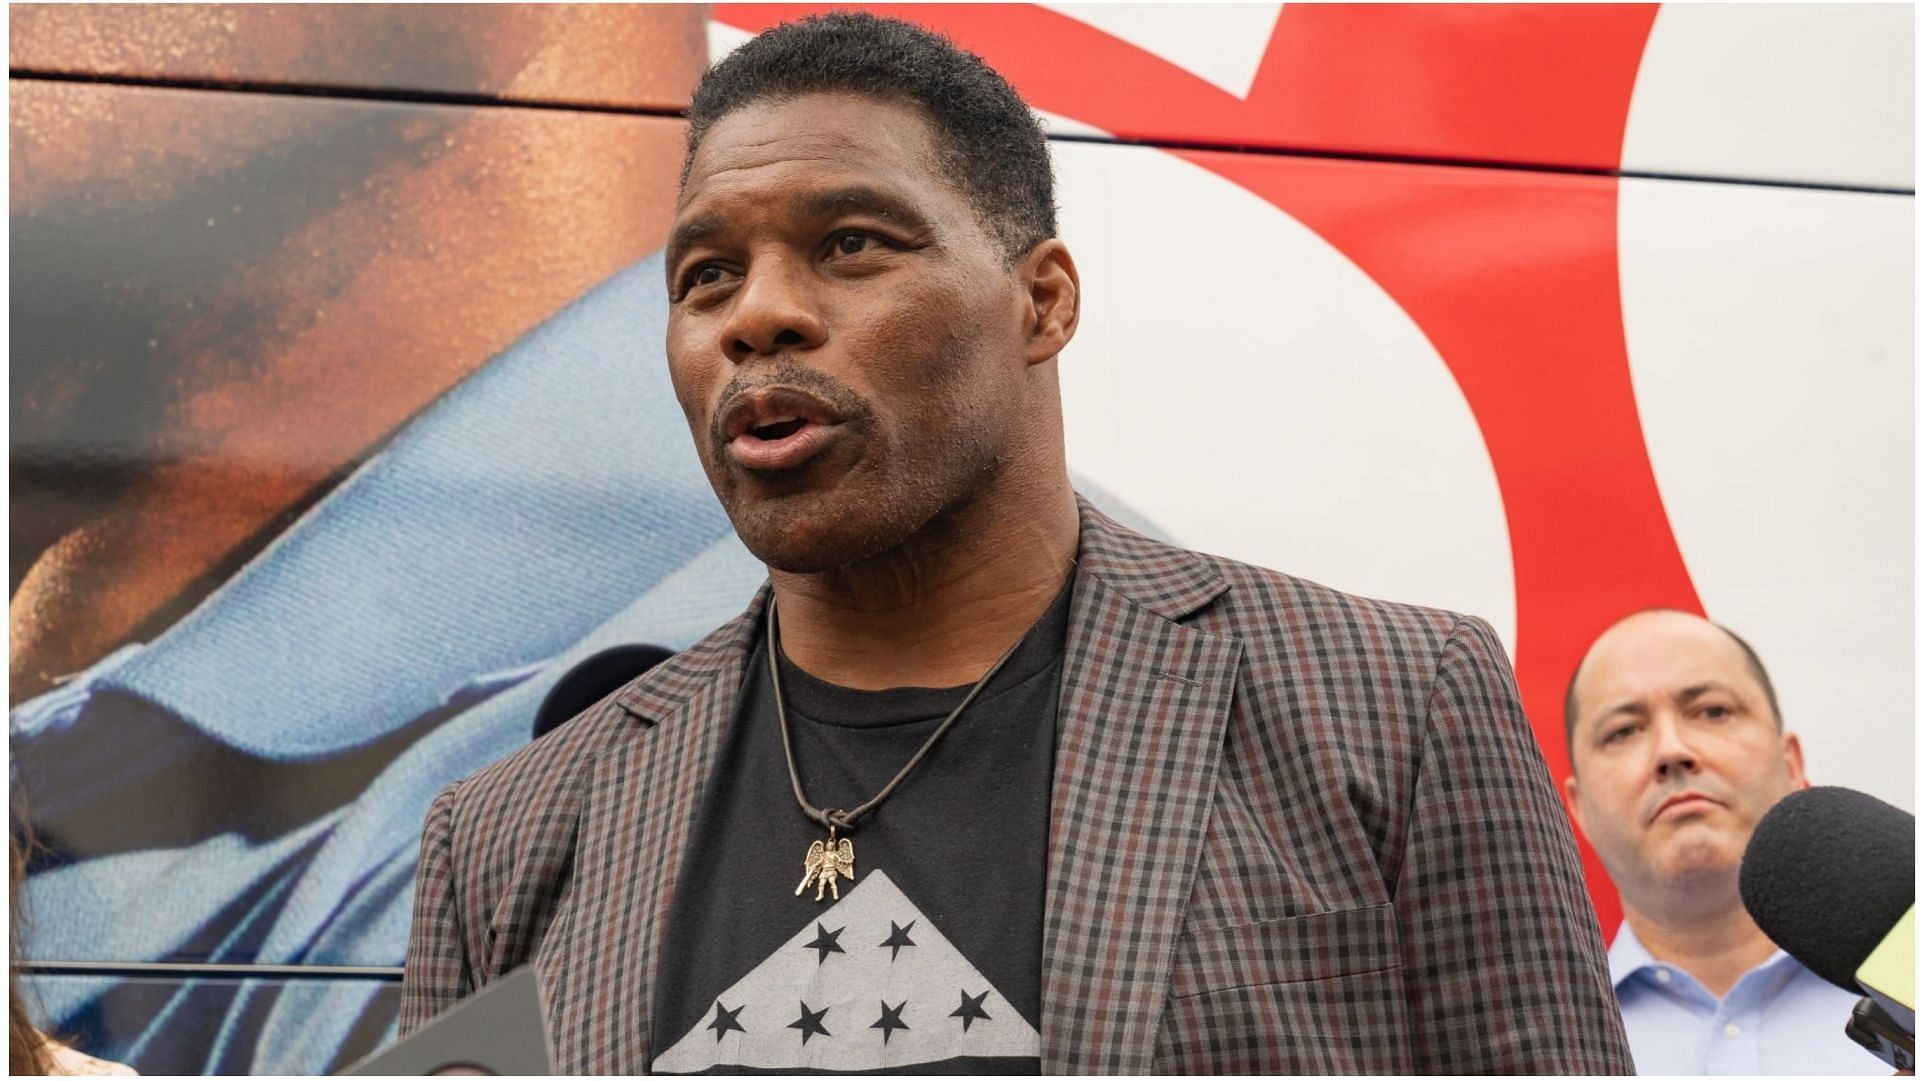 Herschel Walker has been accused of paying his ex-girlfriend for an abortion (Image via Megan Varner/Getty Images)